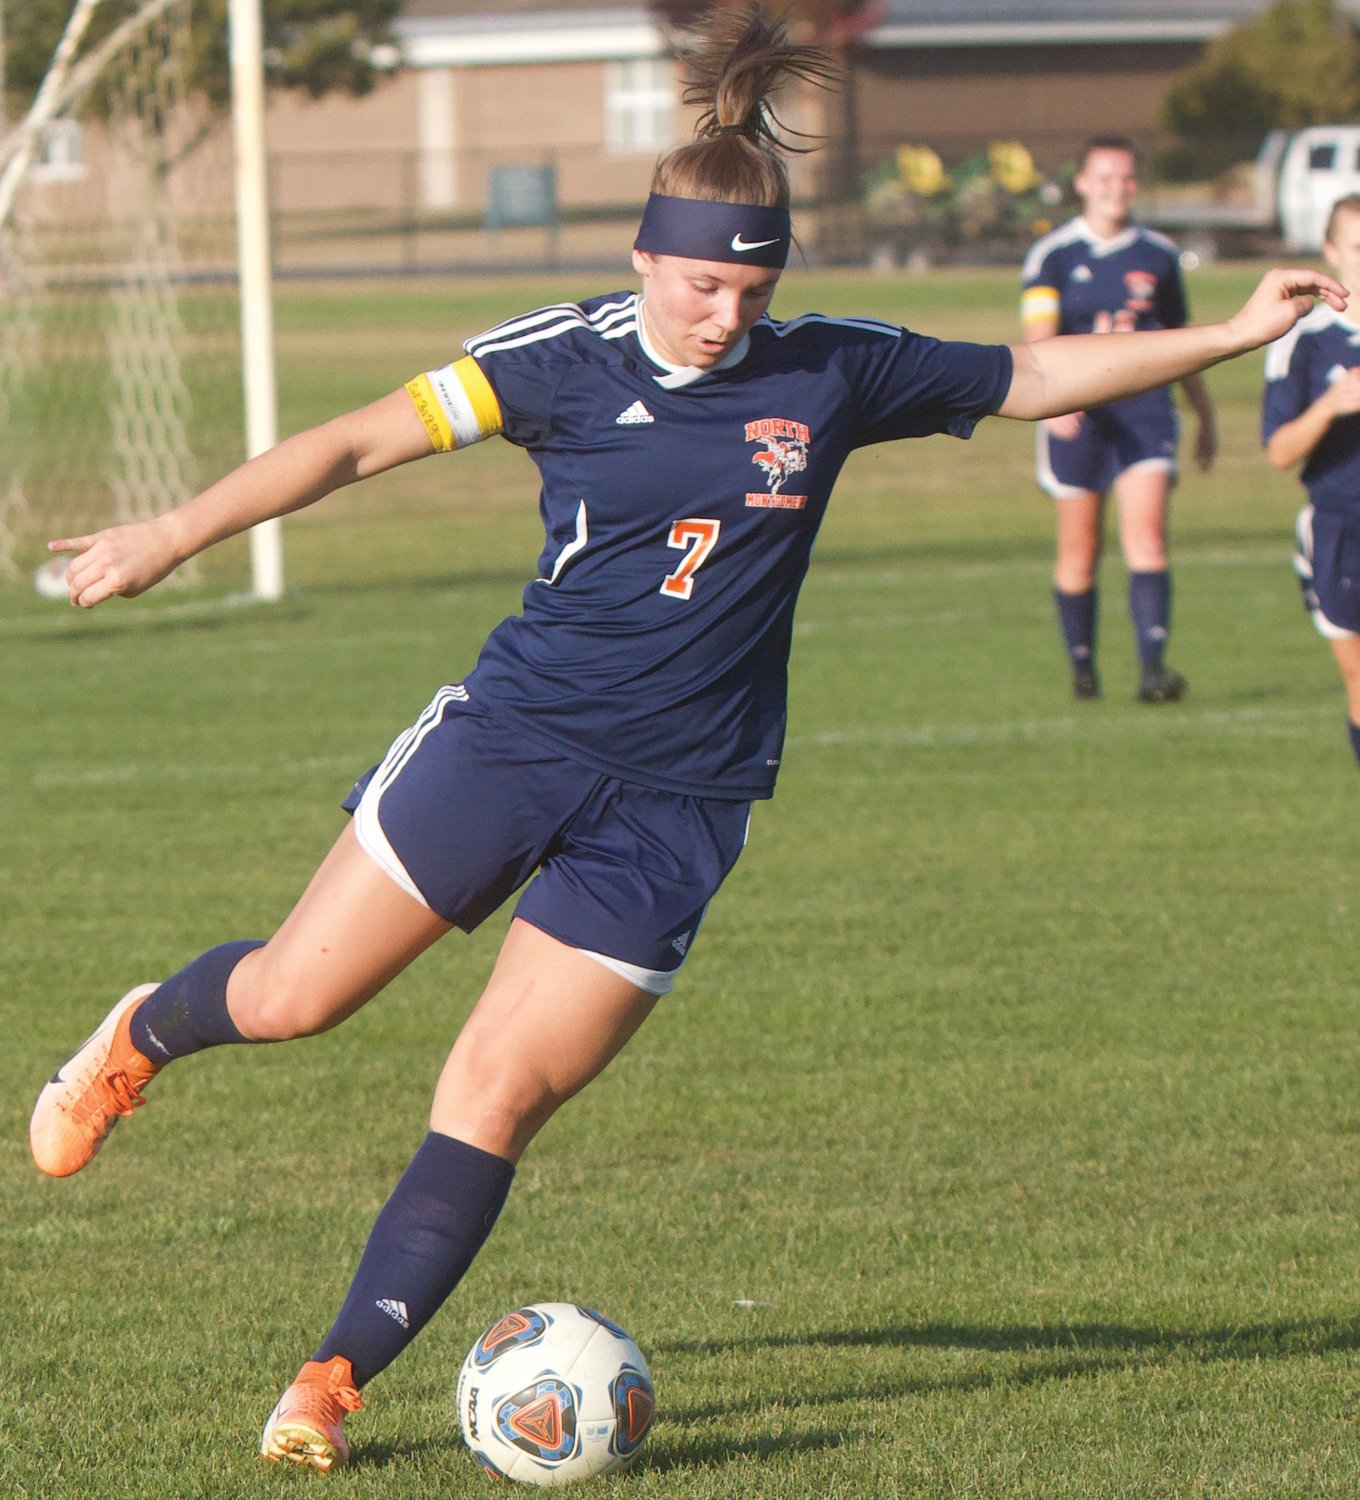 North Montgomery’s Sidney Campbell scored a pair of goals in the Chargers’ 7-0 win over Crawfordsville on Thursday.